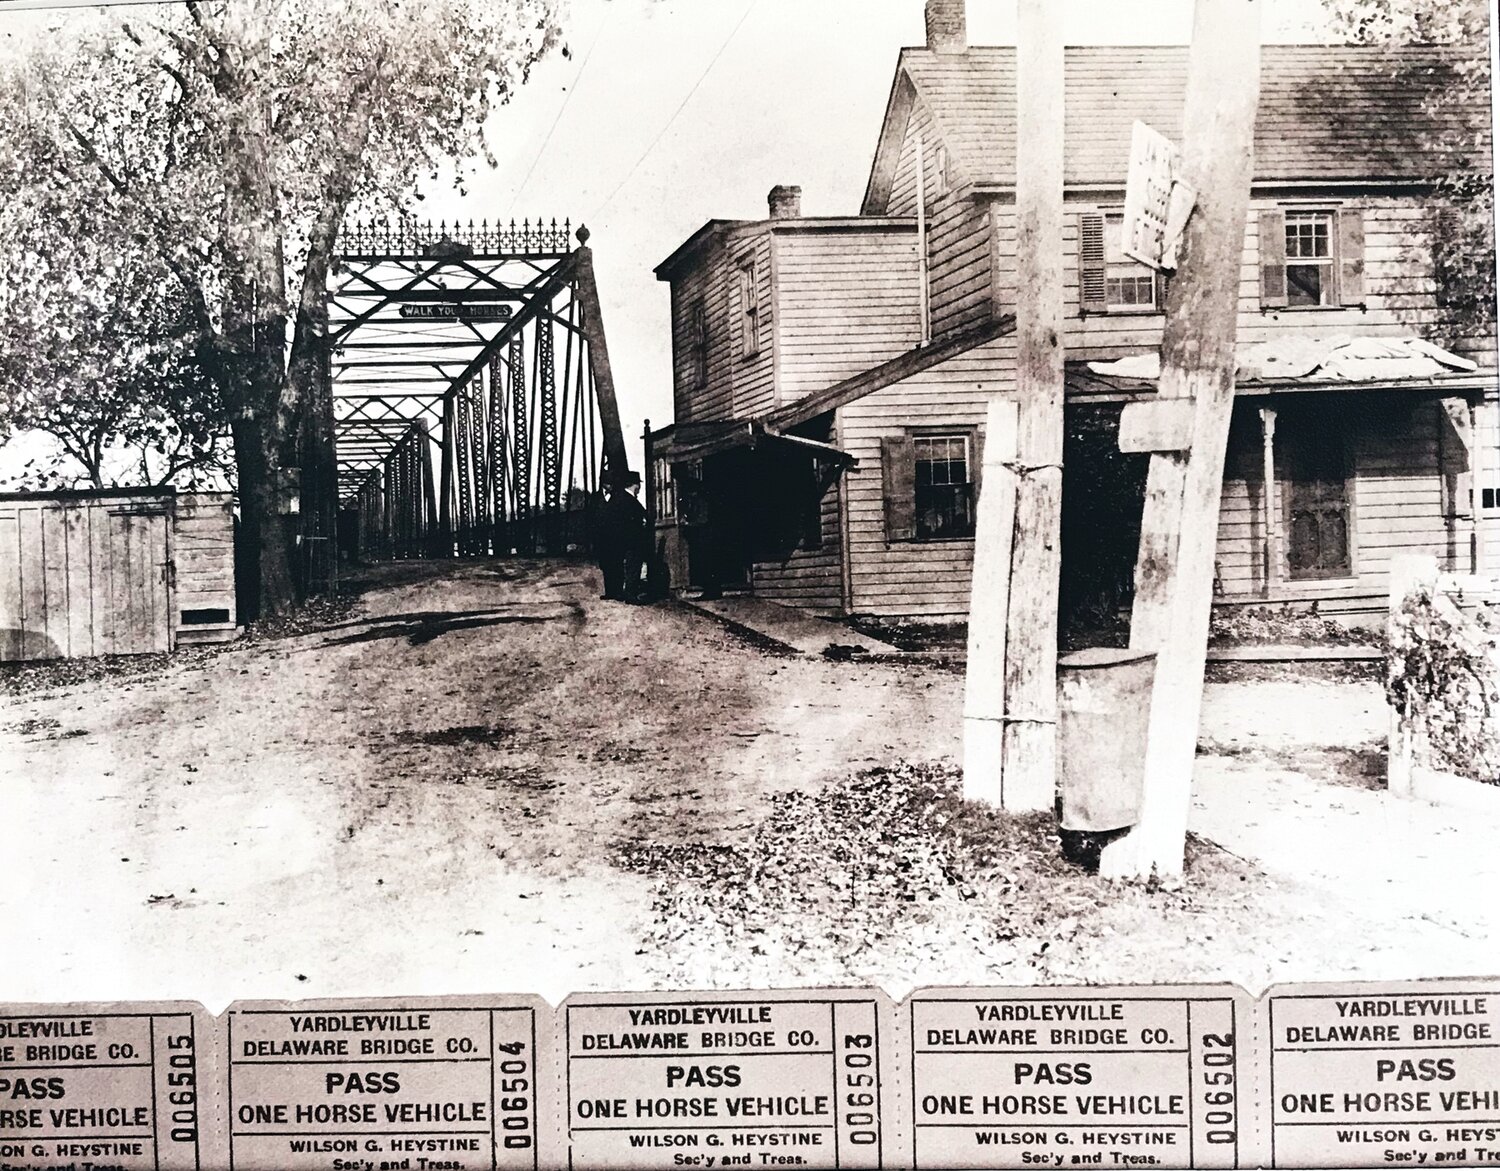 In 1904, a steel river bridge was erected to replace the wooden covered bridge that was lost in the 1903 flood. A toll collector’s house stood at the approach.